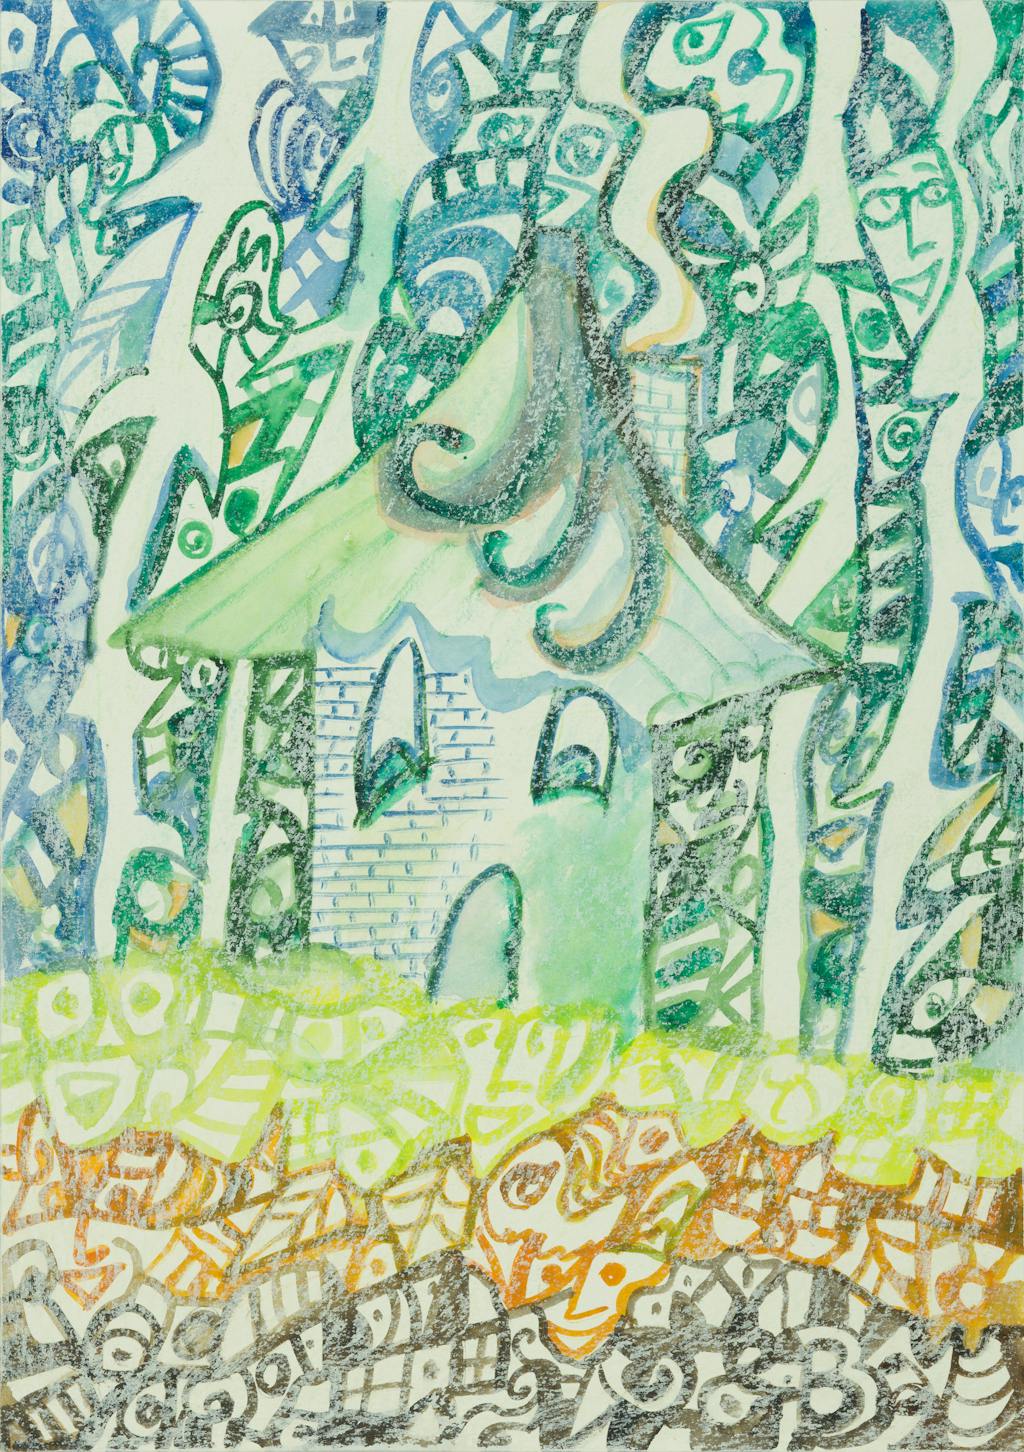 Painting "House, sleeping in forest", painted by Elena Birkenwald in 2016